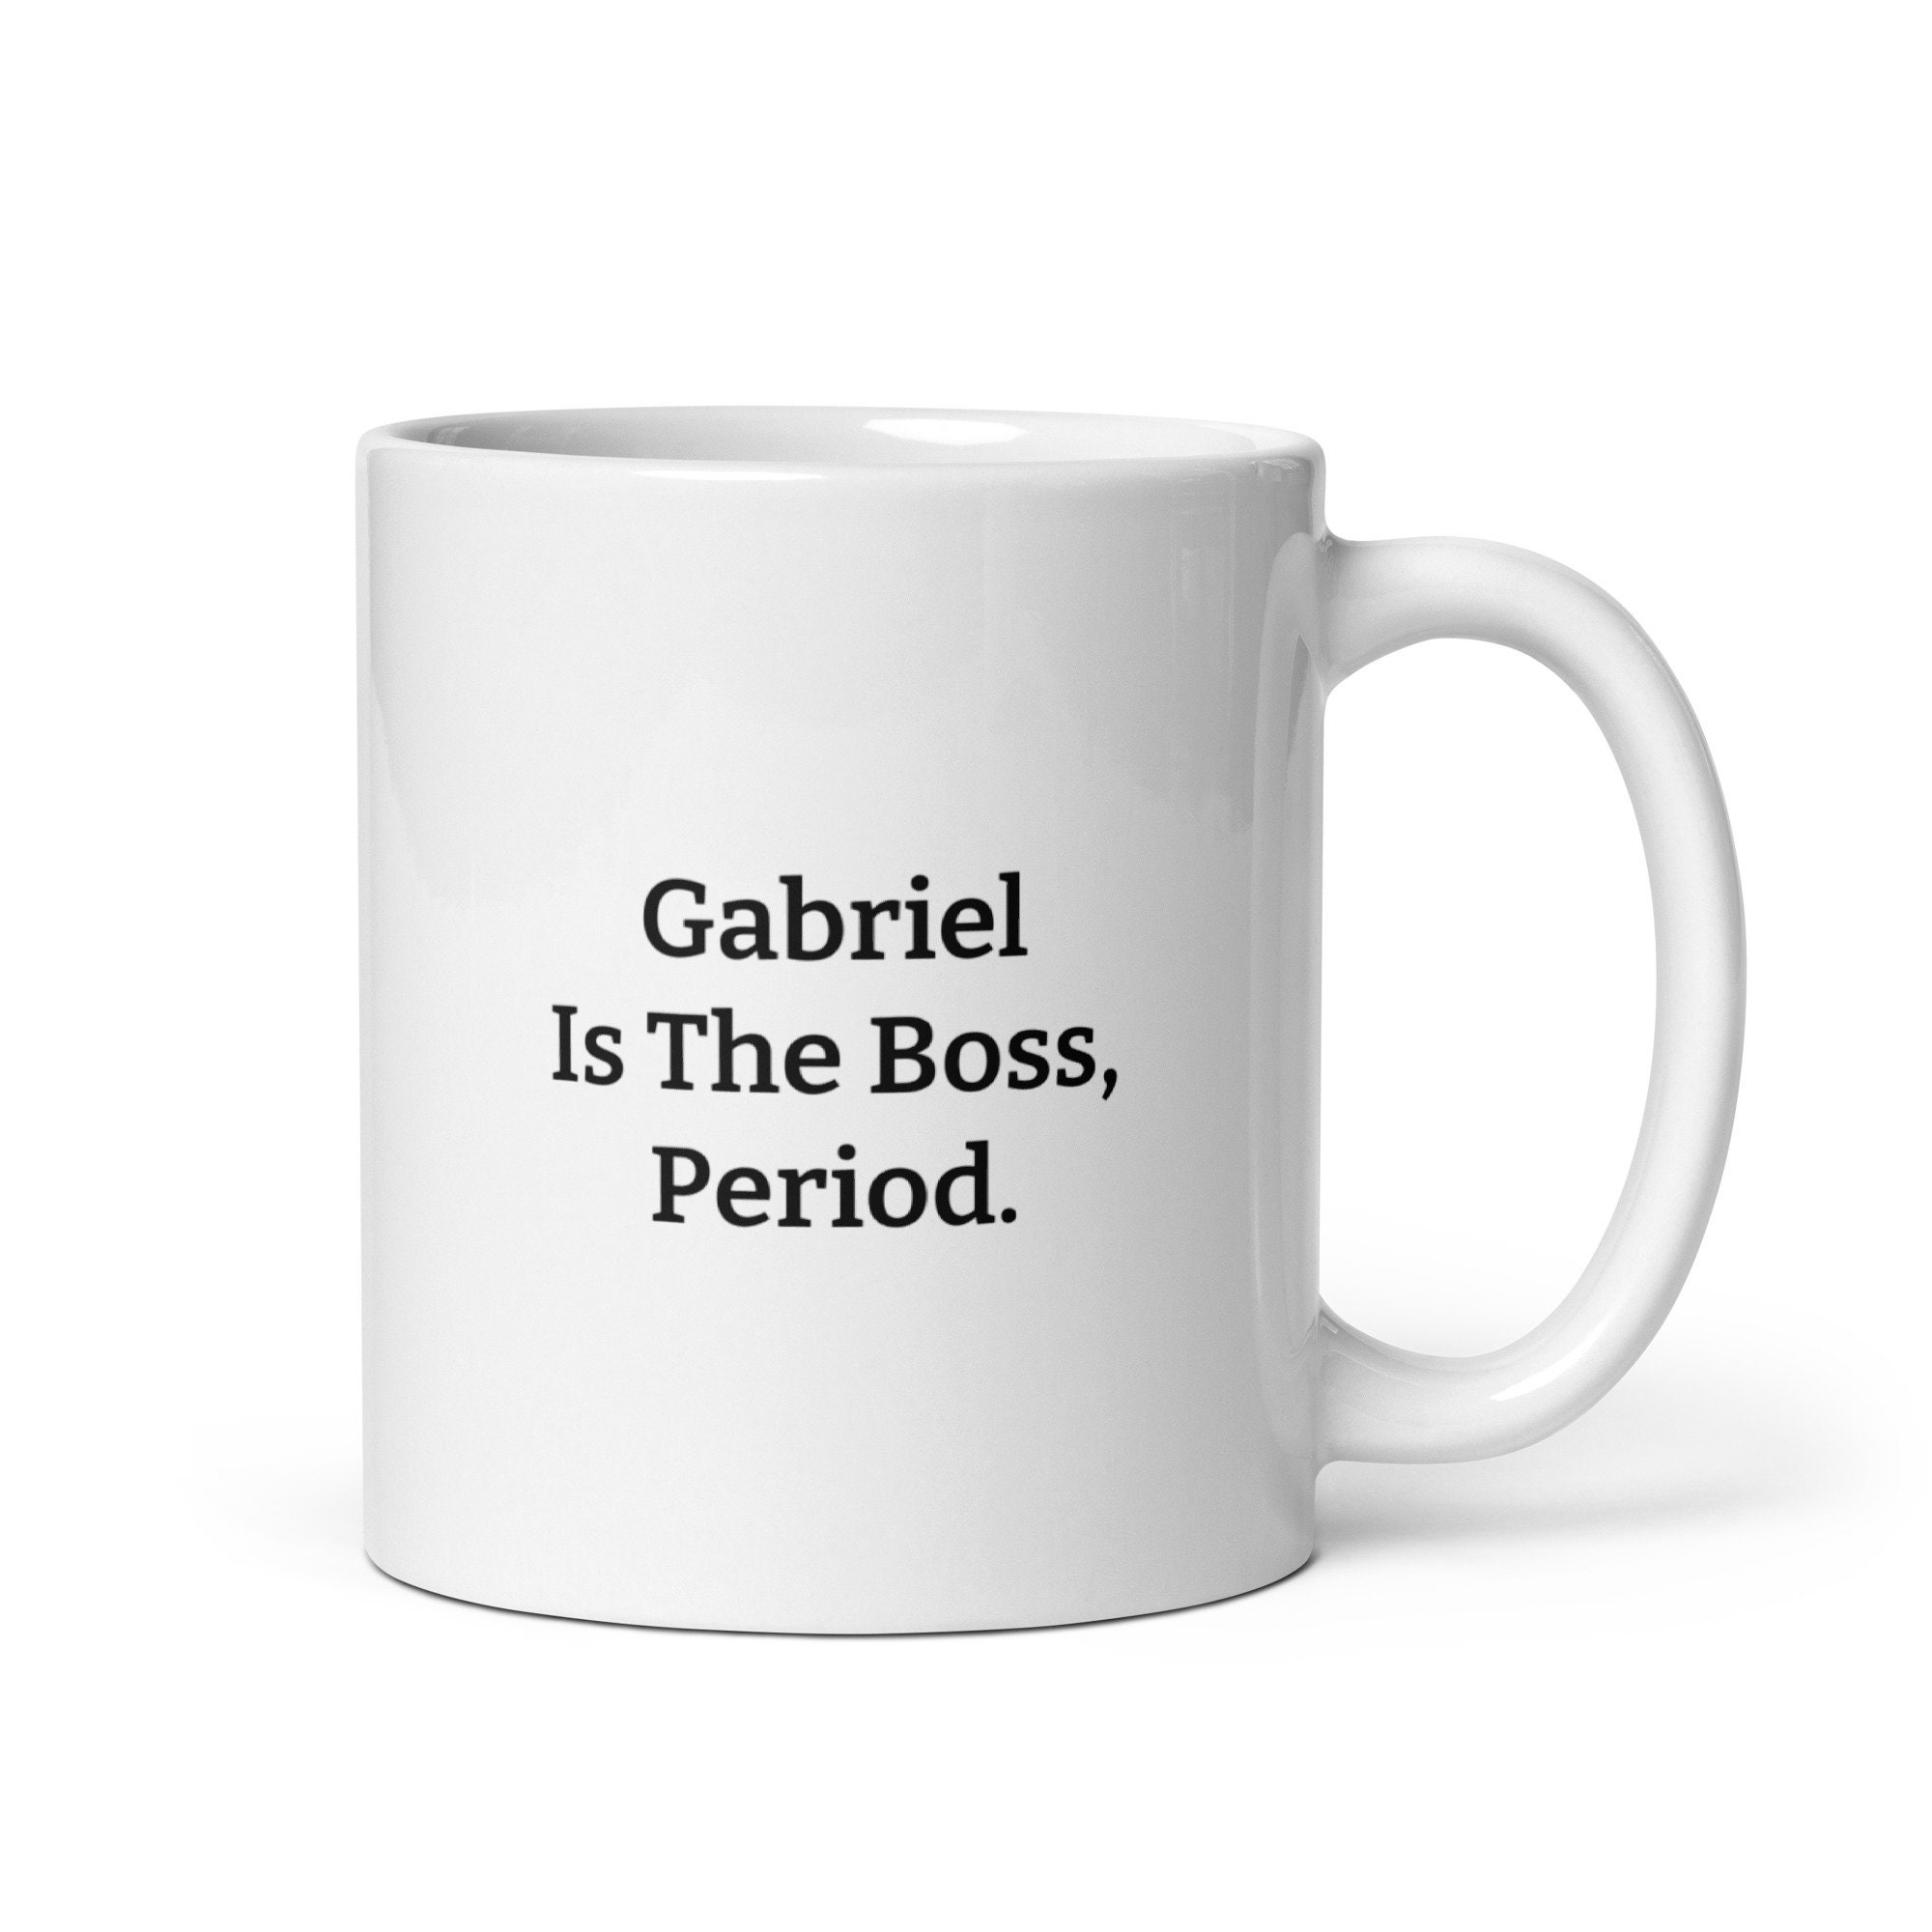 Boyfriend Gifts For Husband funny gifts gag Mug Anniversary Gifts For Him  Fiance Coffee Mug BF Gifts Valentines Day Gifts Funny Phil Colins